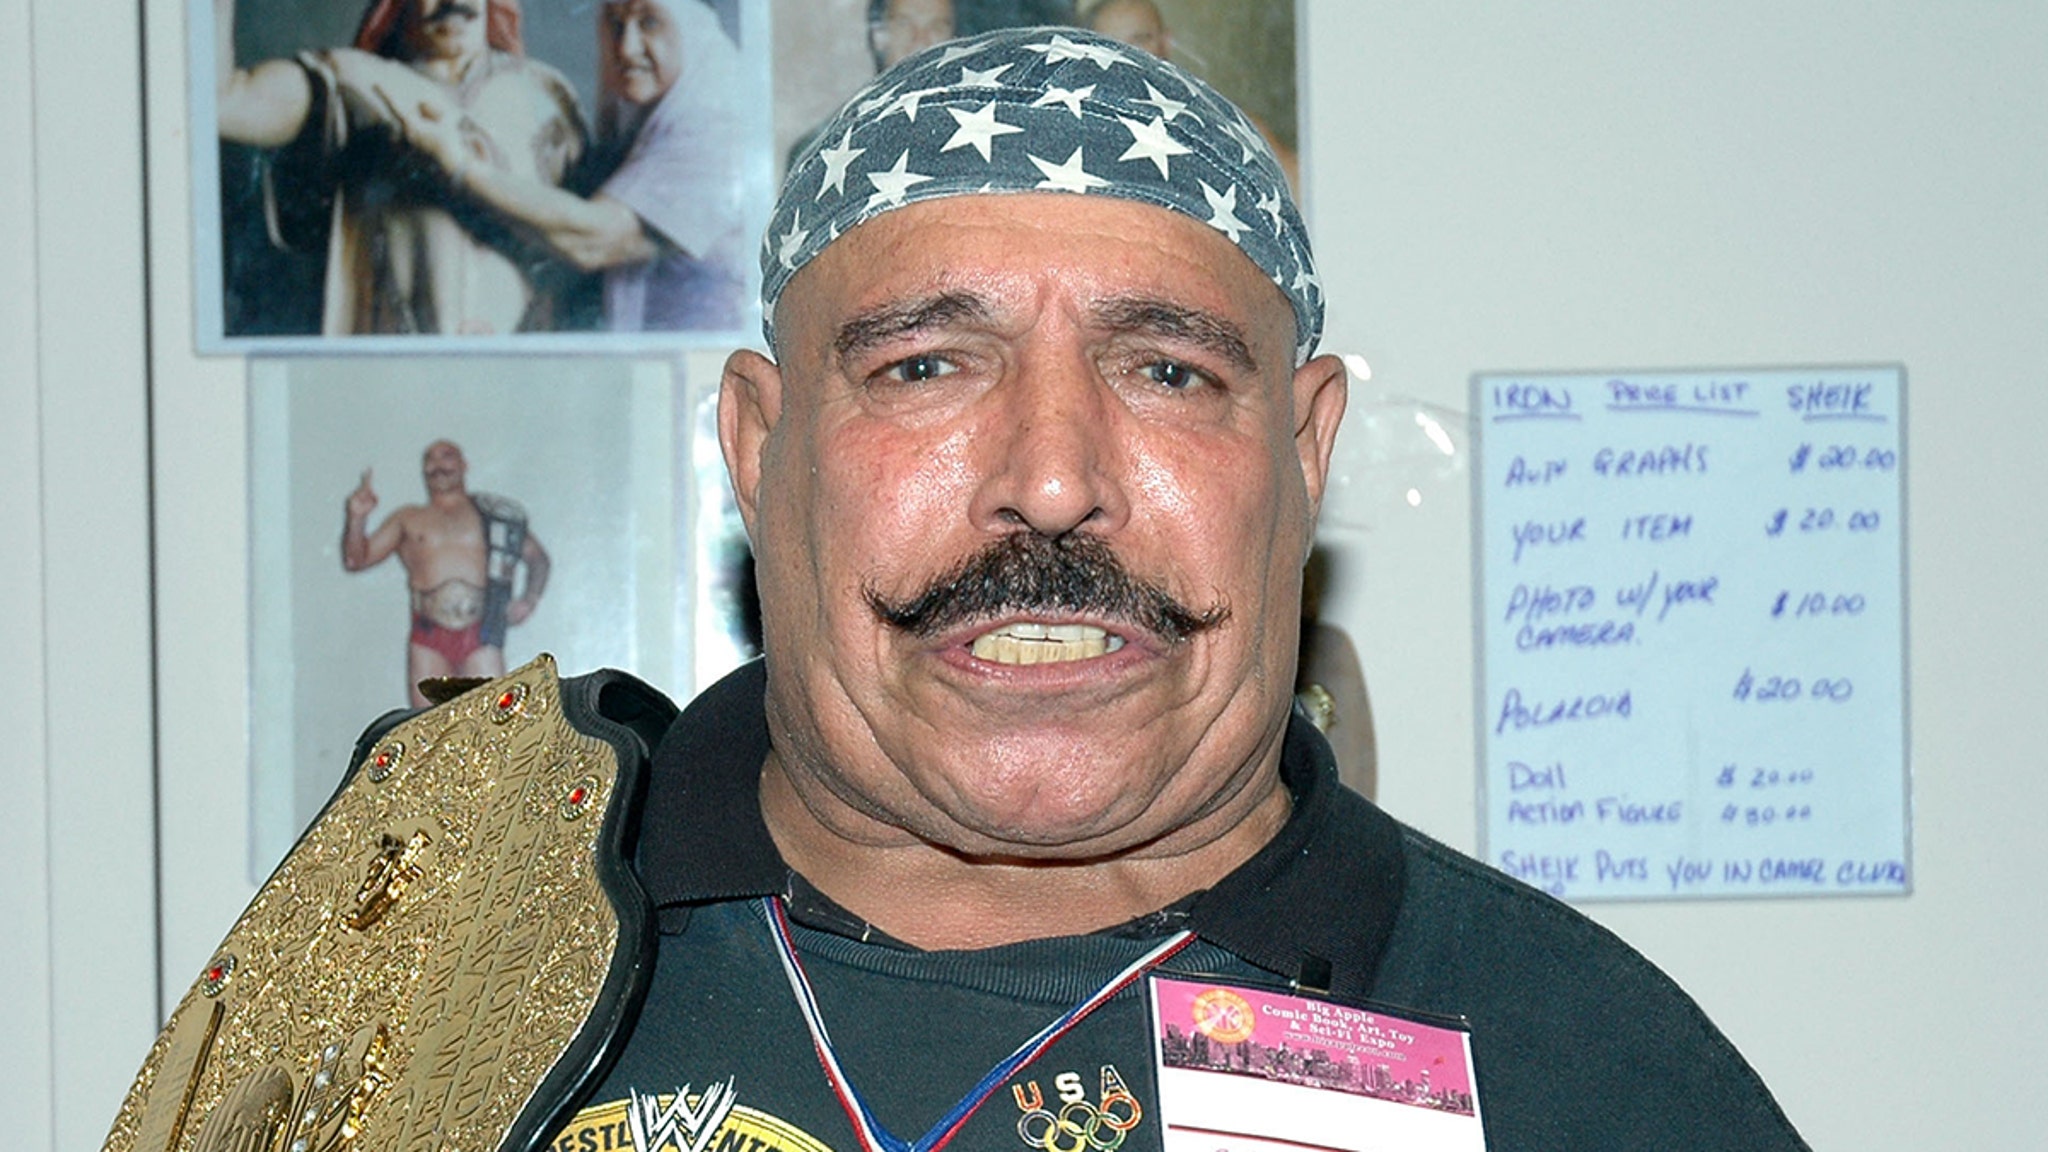 WWE legend Iron Sheik passes away at the age of 81